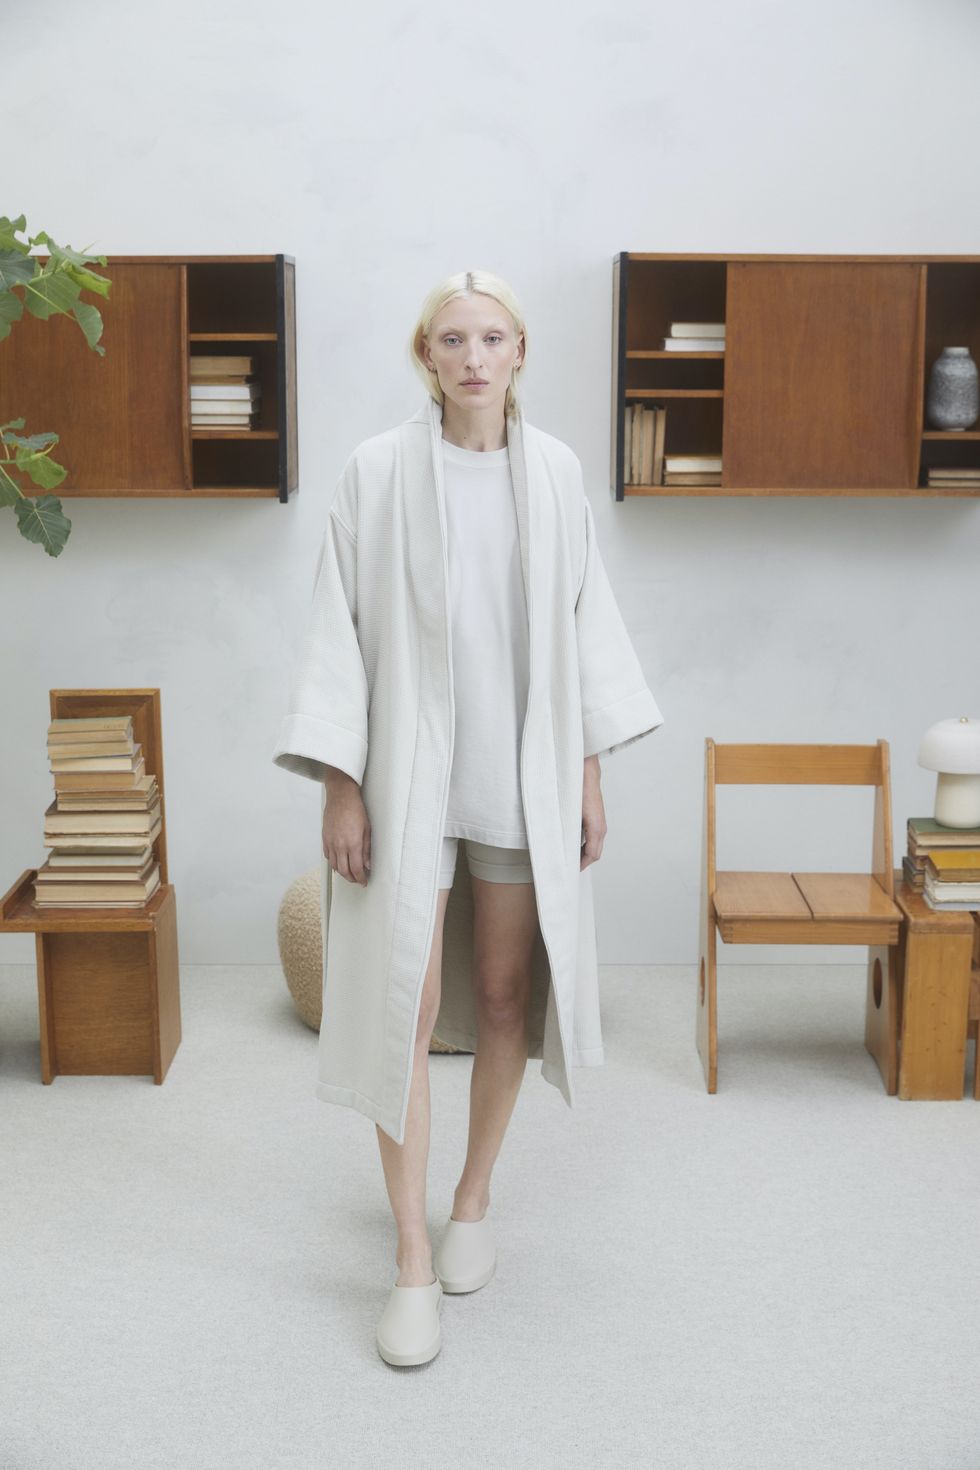 blond woman wearing fear of god home loungewear and california slides in the color cement